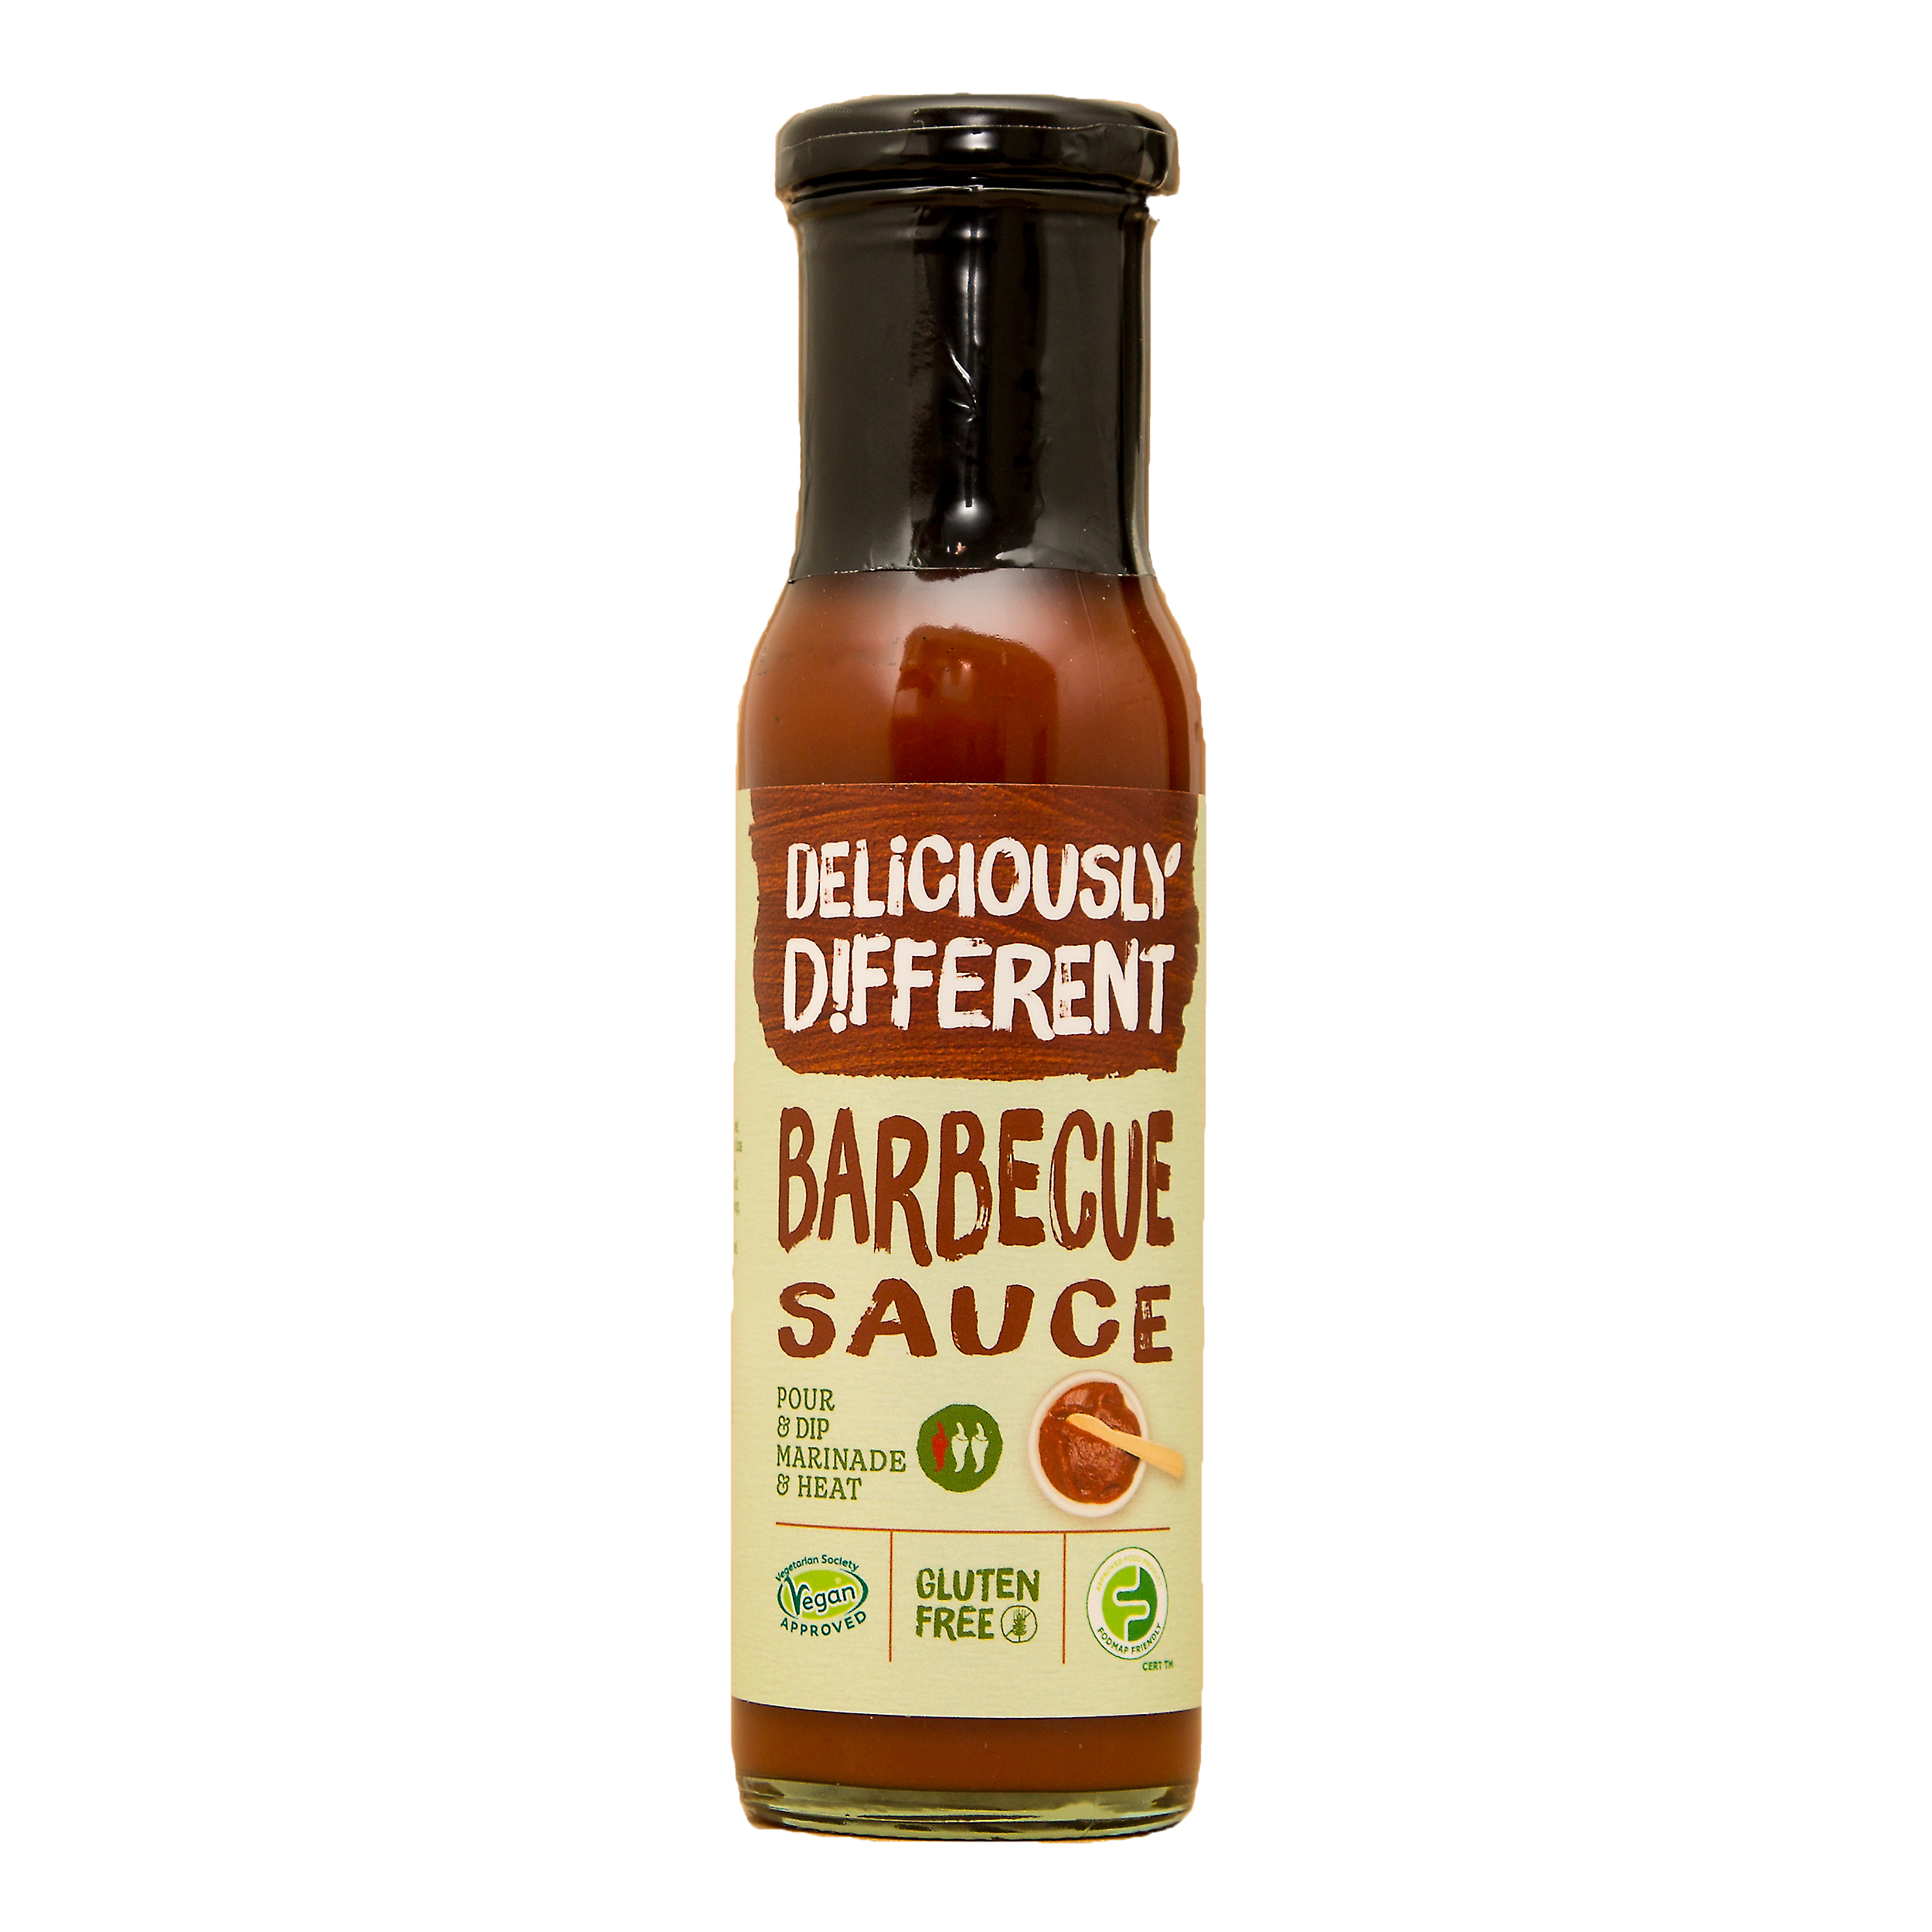 Deliciously Different Barbecue Sauce